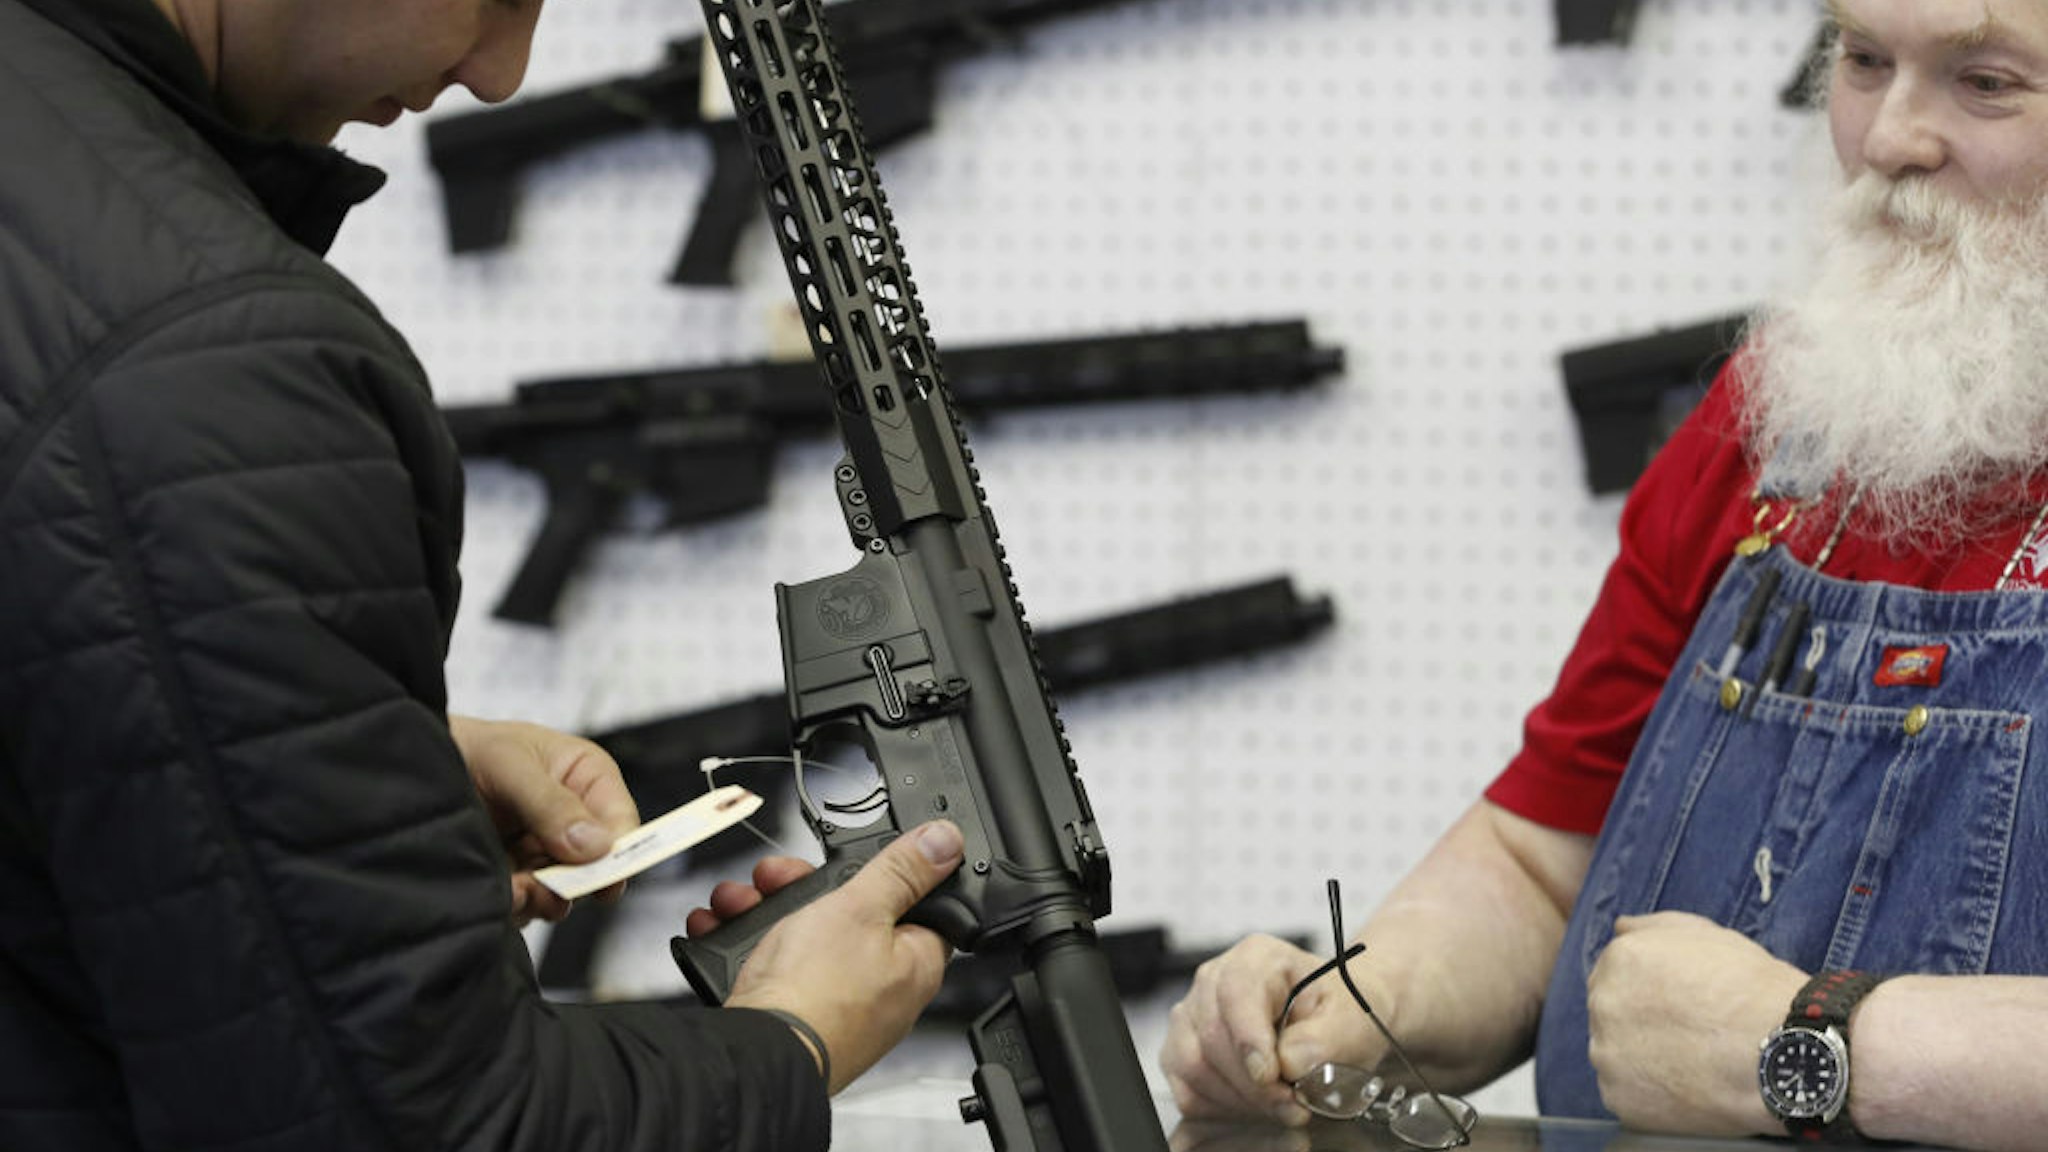 A salesperson shows an AR-15 rifle to a customer at a store in Orem, Utah, U.S., on Thursday, March 25, 2021. Two mass shootings in one week are giving Democrats new urgency to pass gun control legislation, but opposition from Republicans in the Senate remains the biggest obstacle to any breakthrough in the long-stalled debate. Photographer: